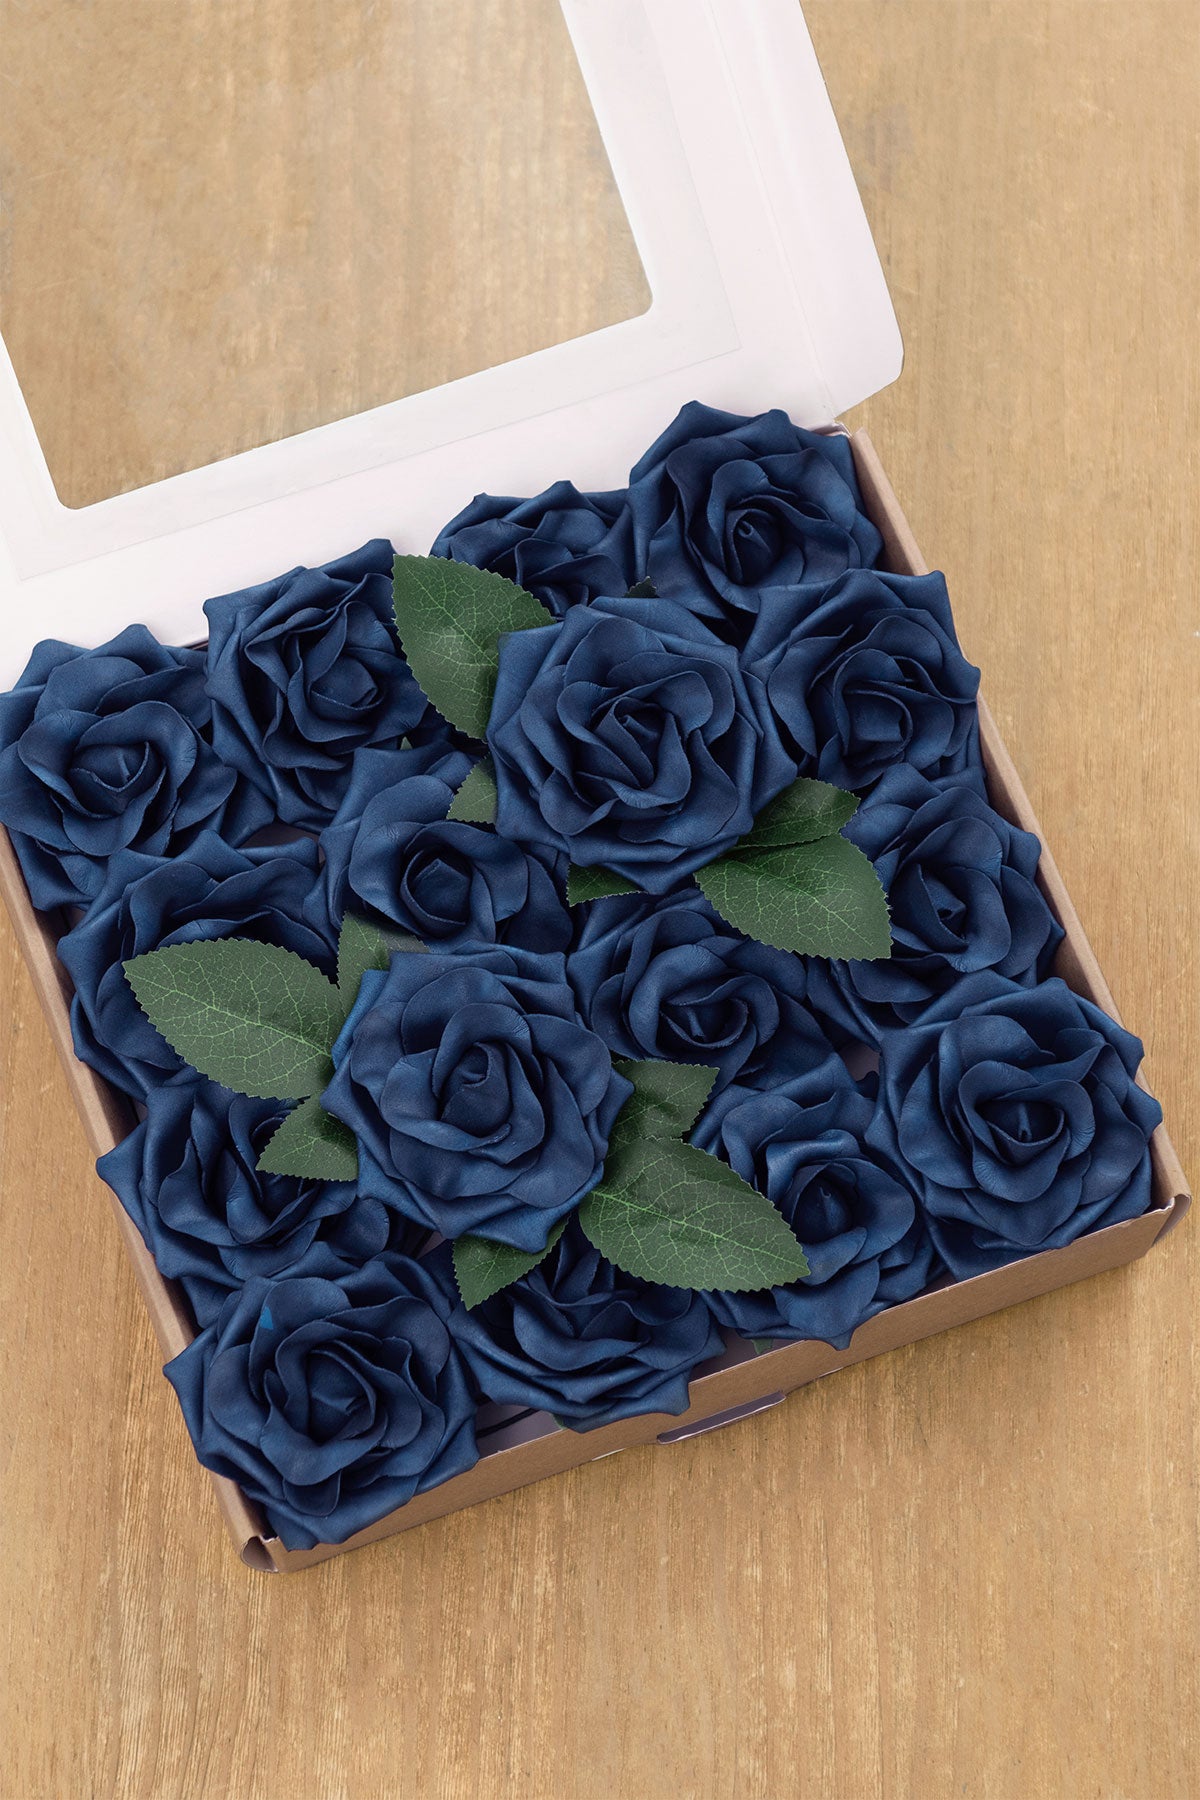 3.5" Foam Avalanche Rose with Stem - 7 Colors